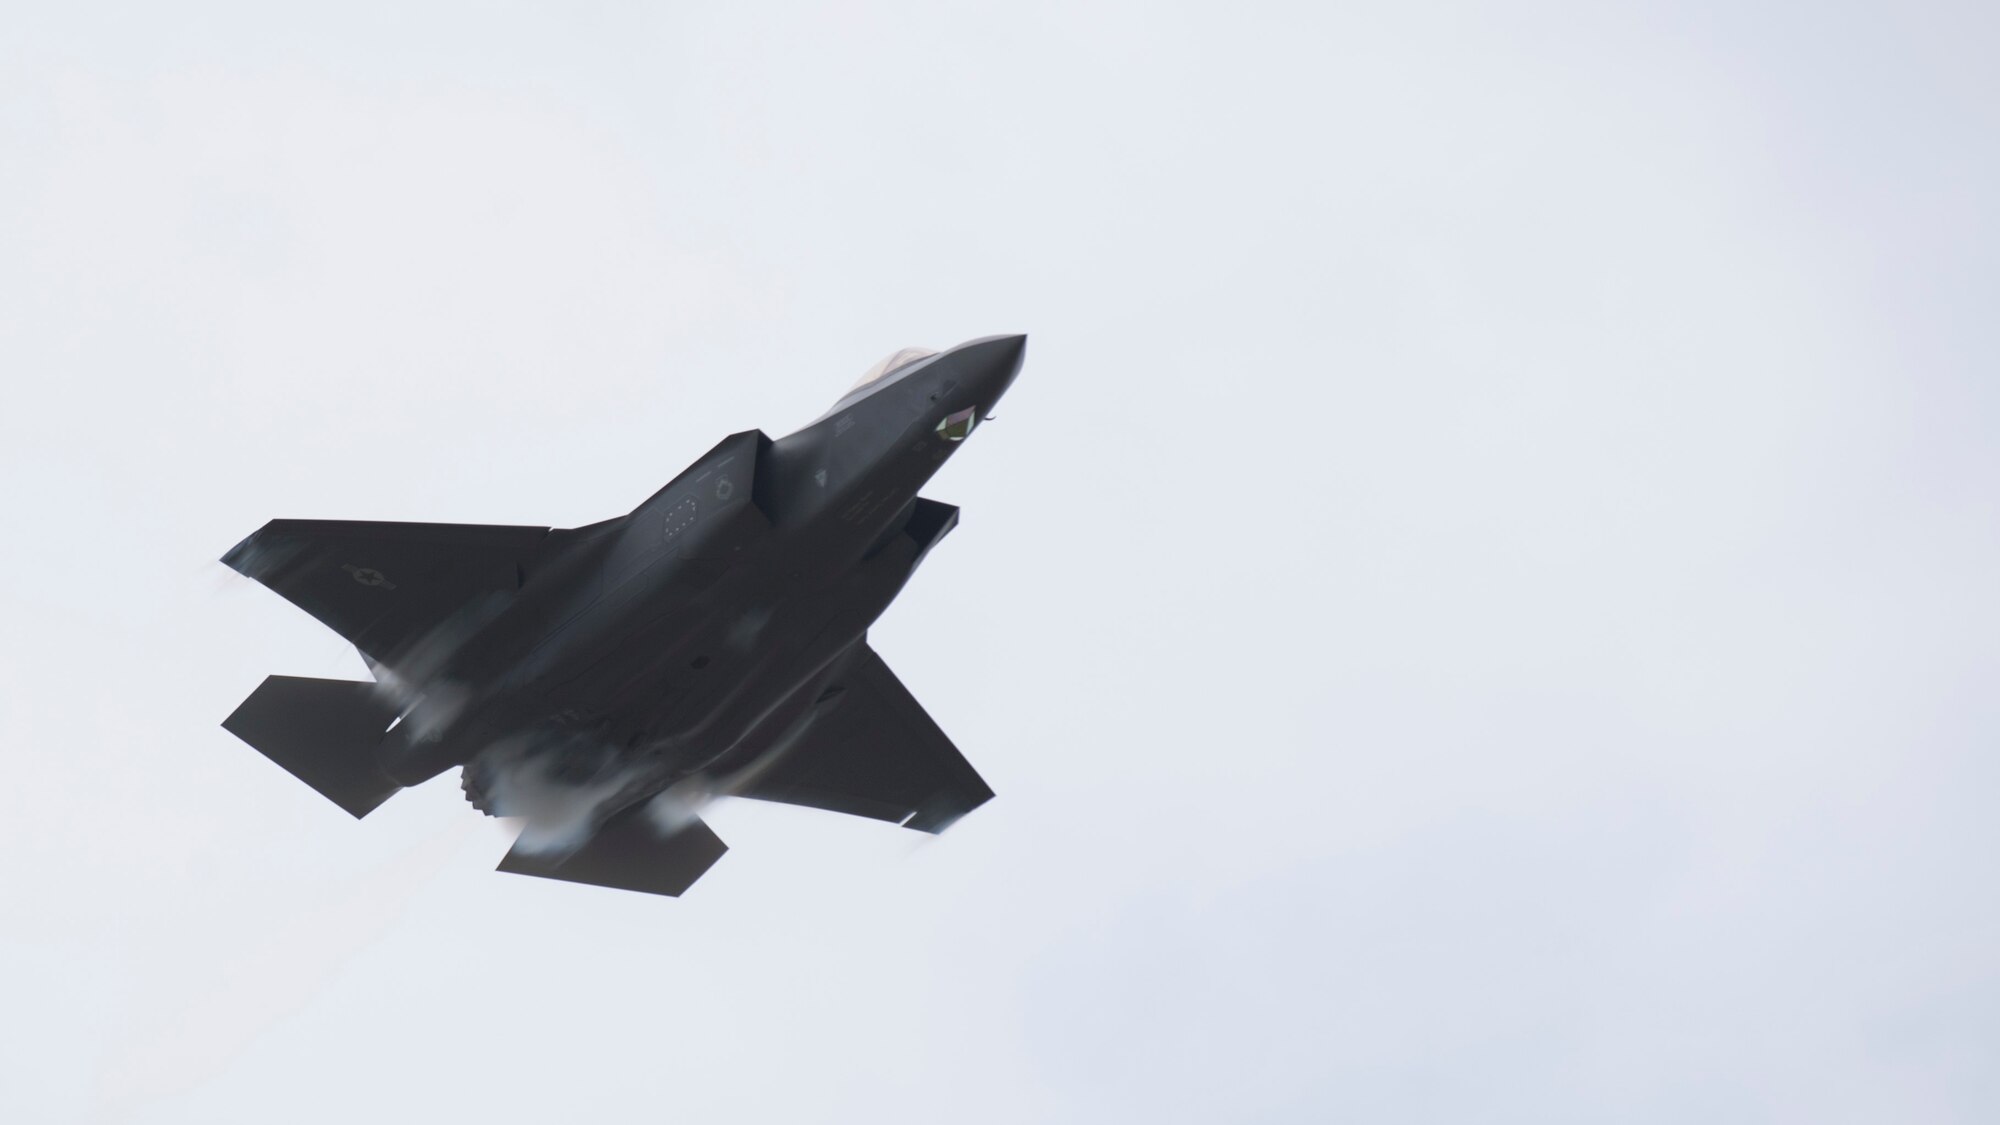 Captain Andrew "Dojo" Olsen, an F-35 Demonstration Team pilot and commander, performs aerial maneuvers in an F-35A Lightning II for the Defenders of Liberty Air & Space Show at Barksdale Air Force Base, La., May 18, 2019. With its aerodynamic performance and advanced integrated avionics, the F-35A provides next-generation stealth, enhanced situational awareness, and reduced vulnerability for the United States and allied nations. (U.S. Air Force photo by Senior Airman Stuart Bright)